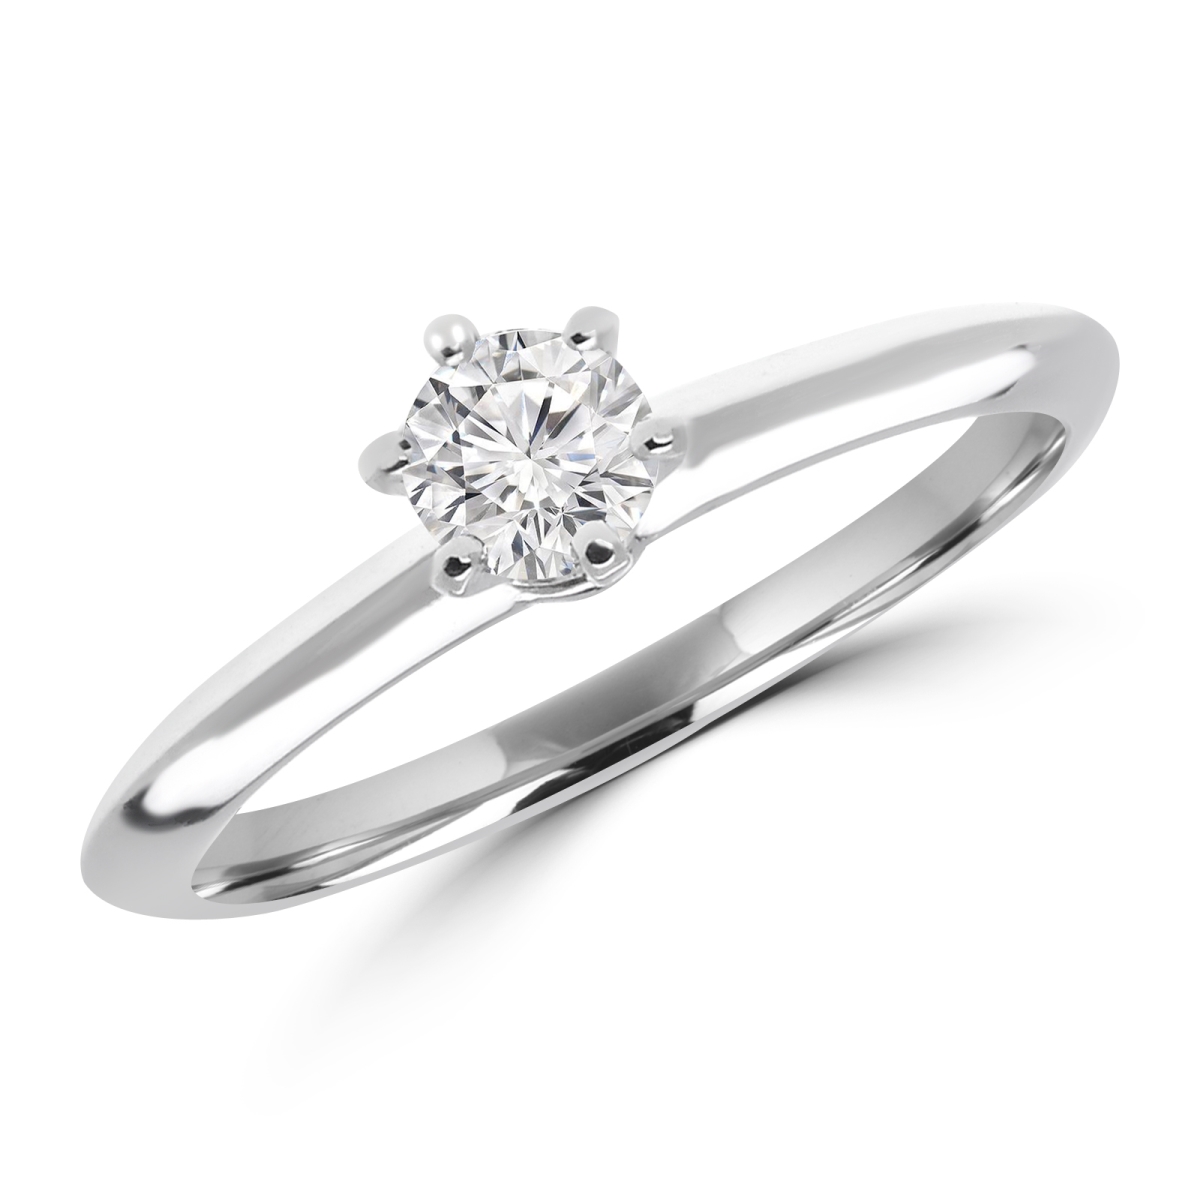 Picture of Majesty Diamonds MD170191 0.33 CT Round Diamond Solitaire Engagement Ring in 10K